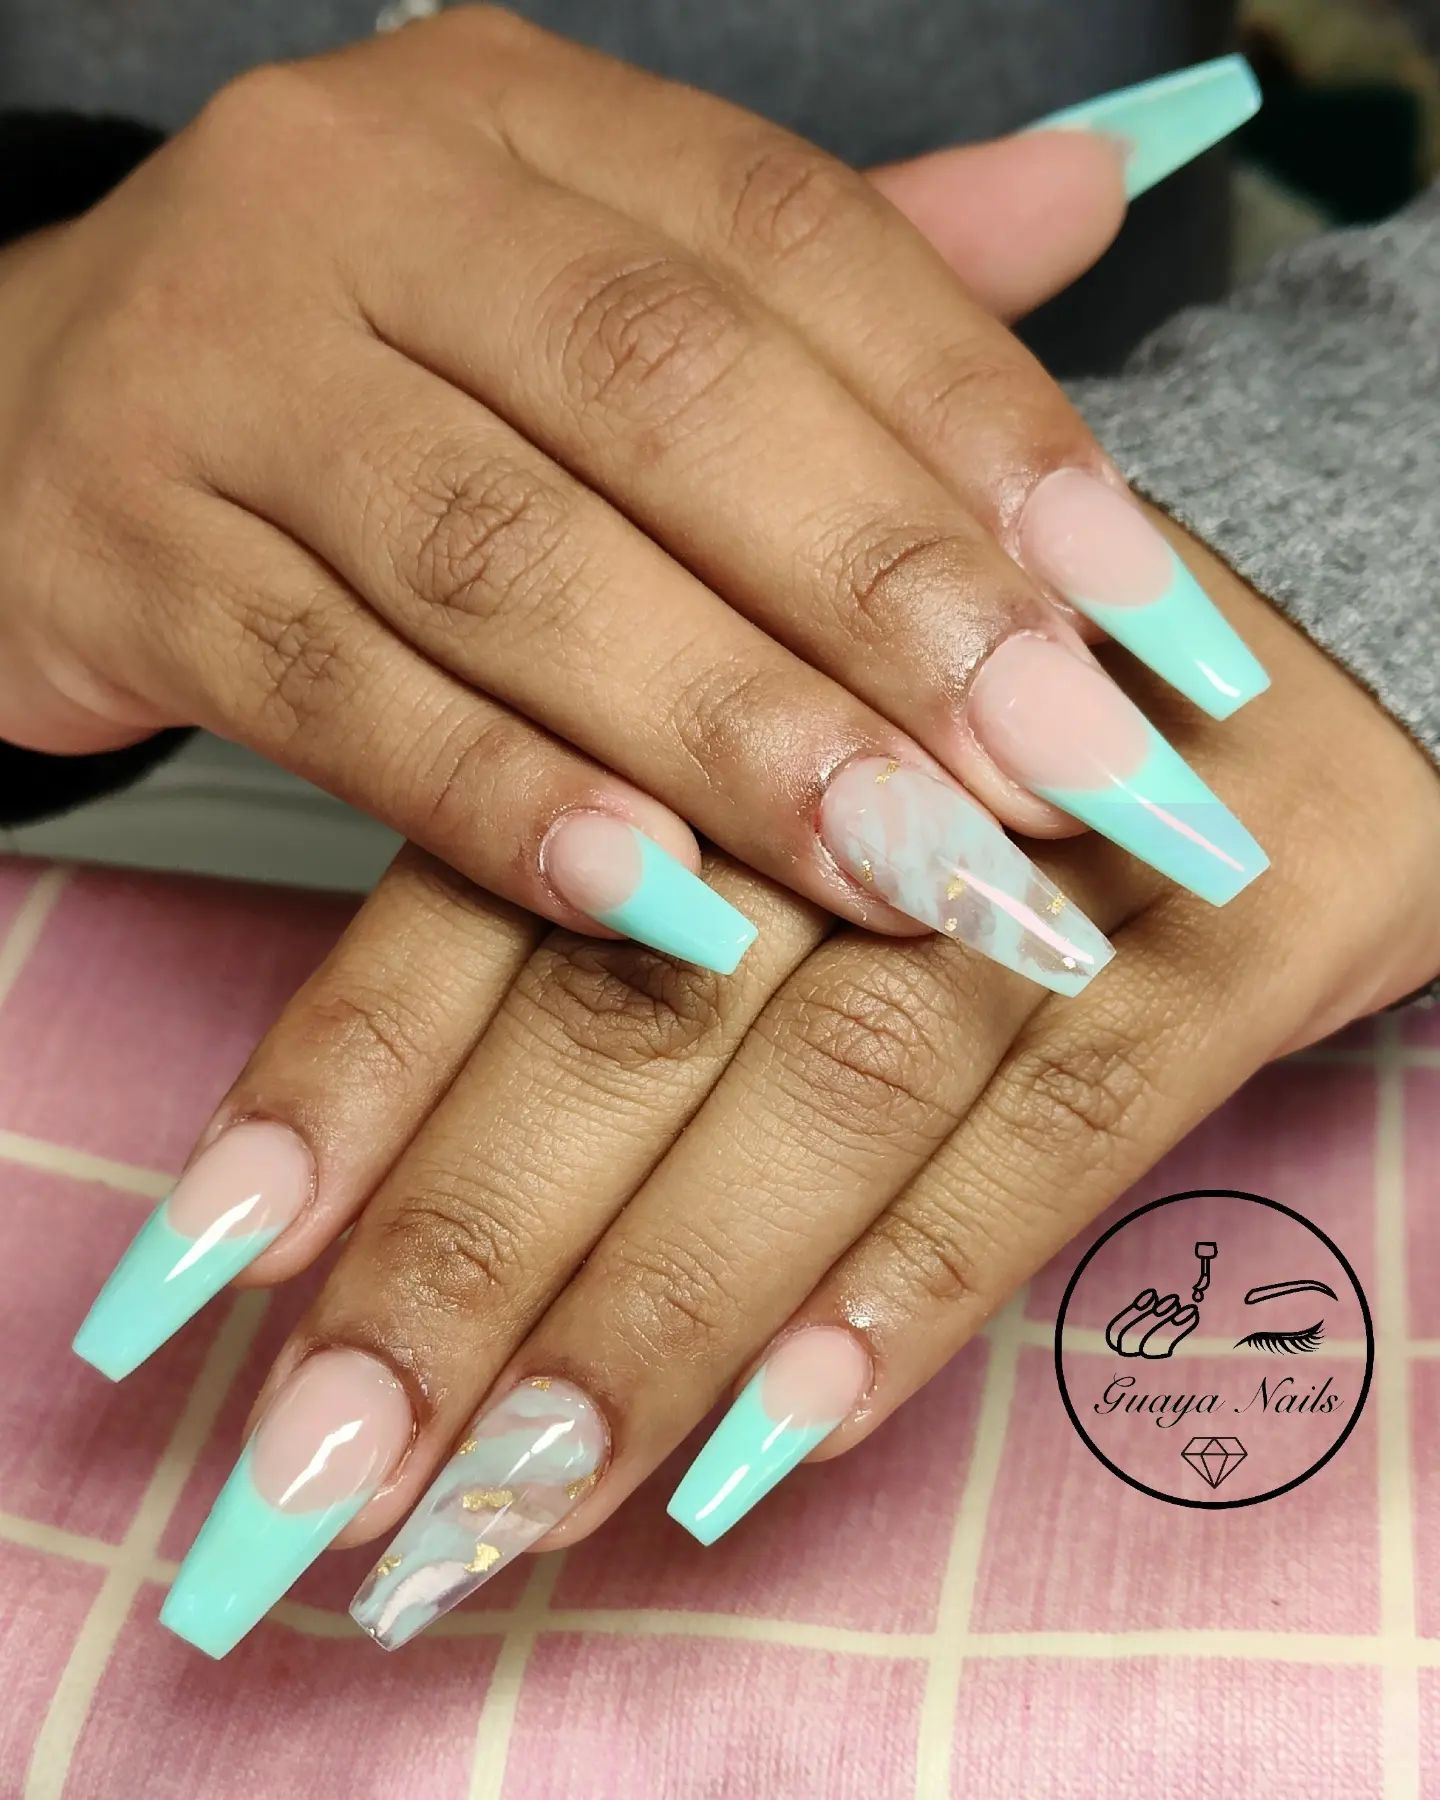 Mint coffin manicure such as this one is a must-do for the summer!